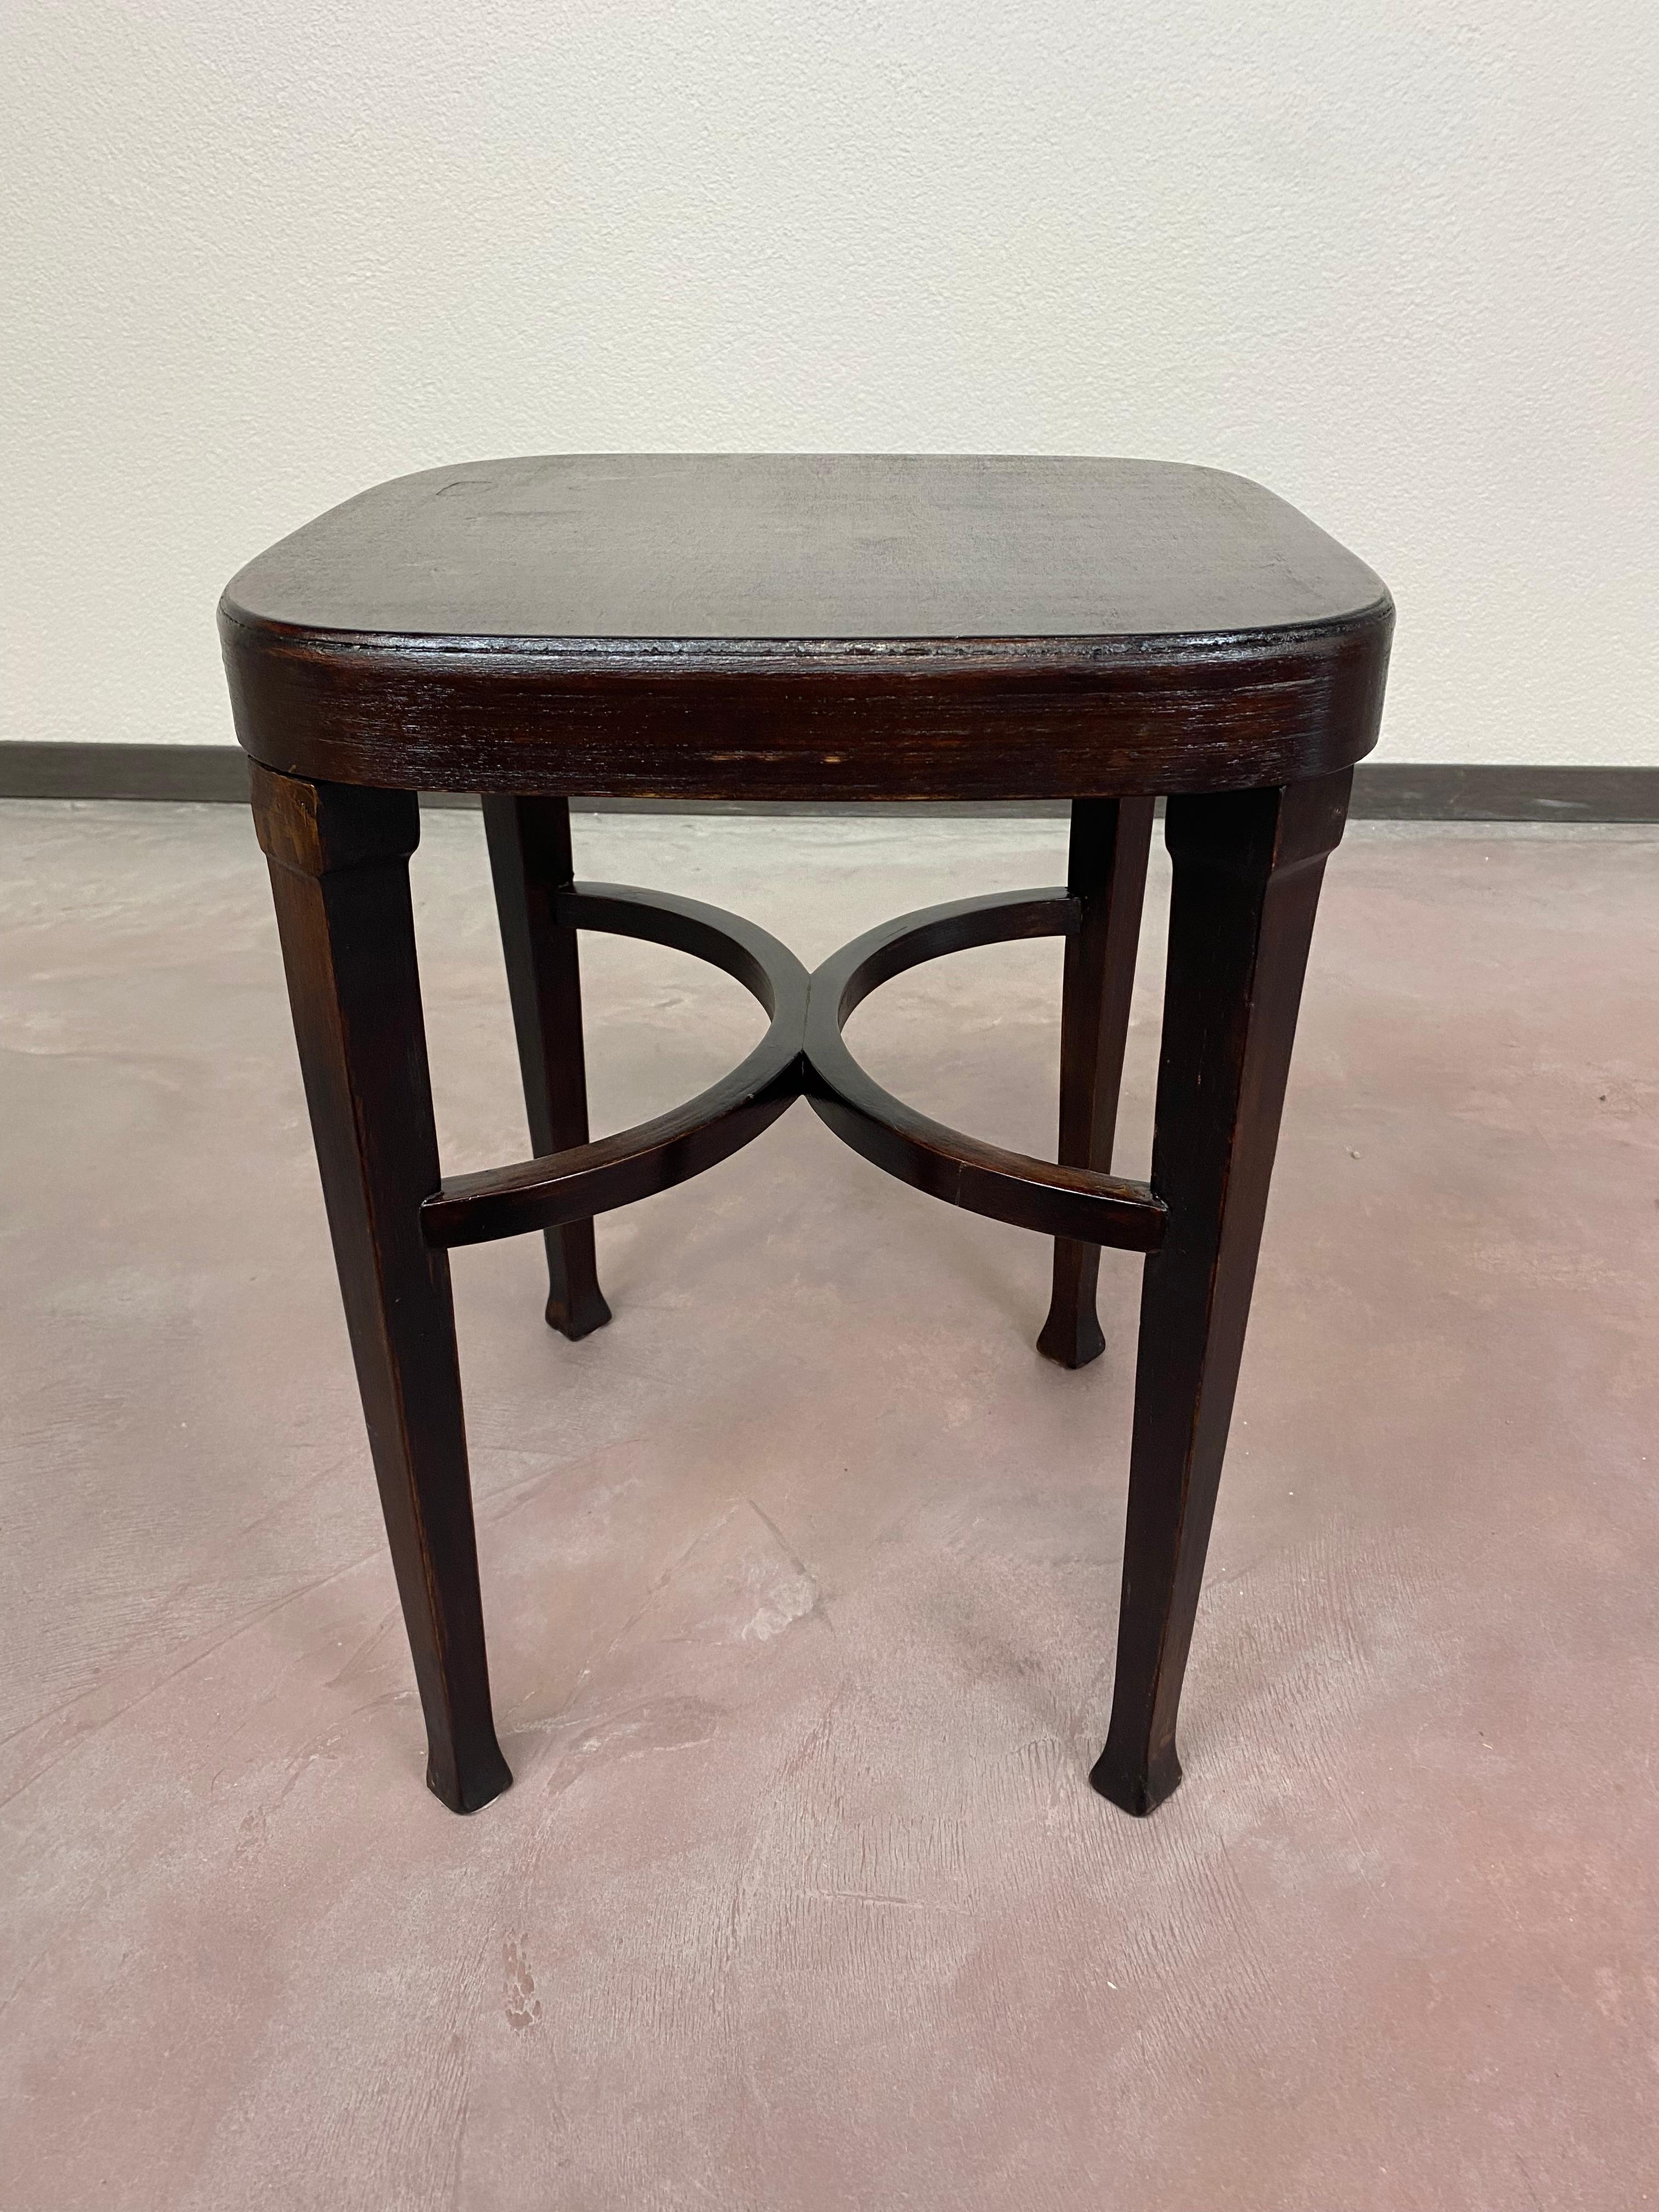 Secession stool no.309 by Thonet.